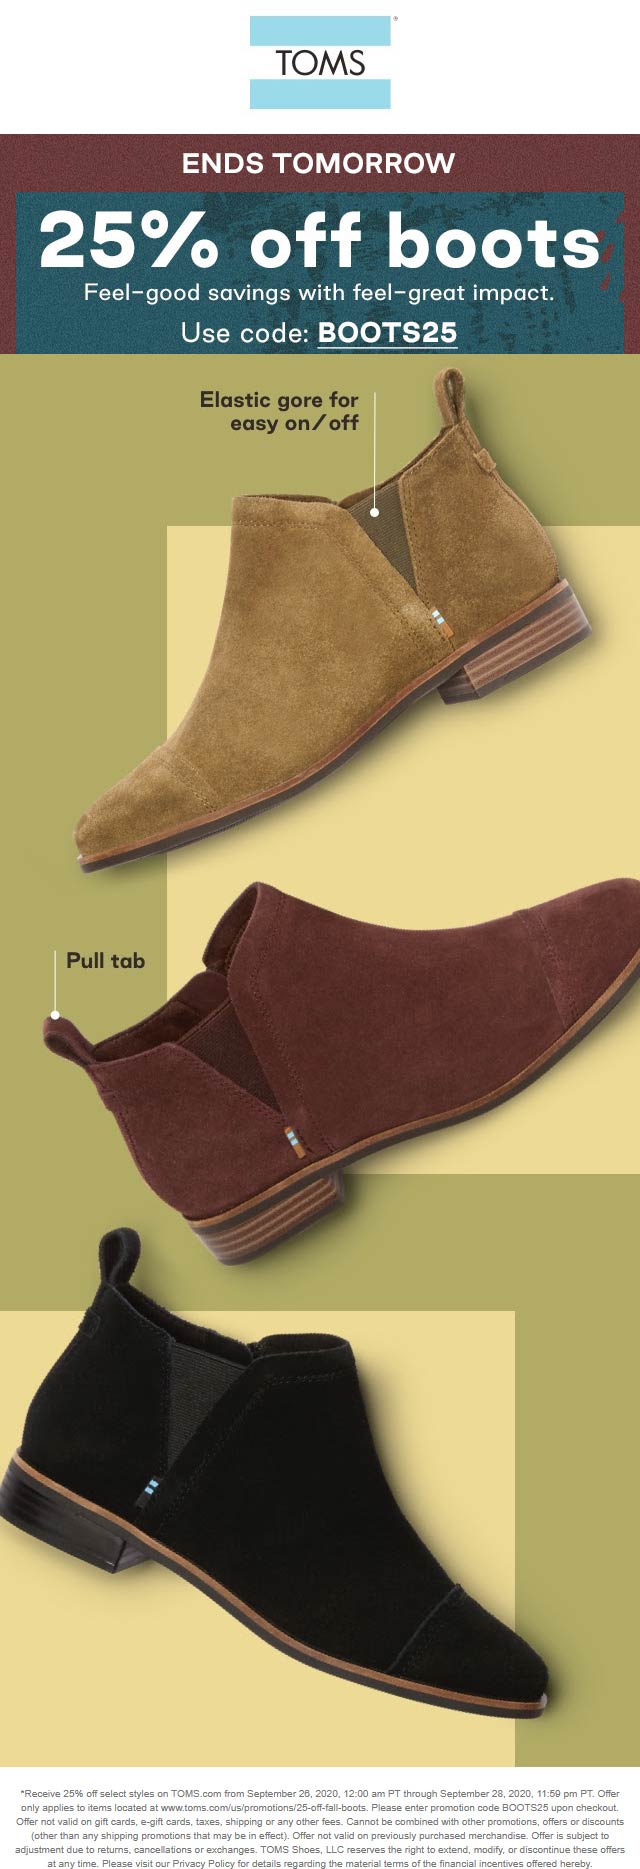 TOMS stores Coupon  25% off boots at TOMS via promo code BOOTS25 #toms 